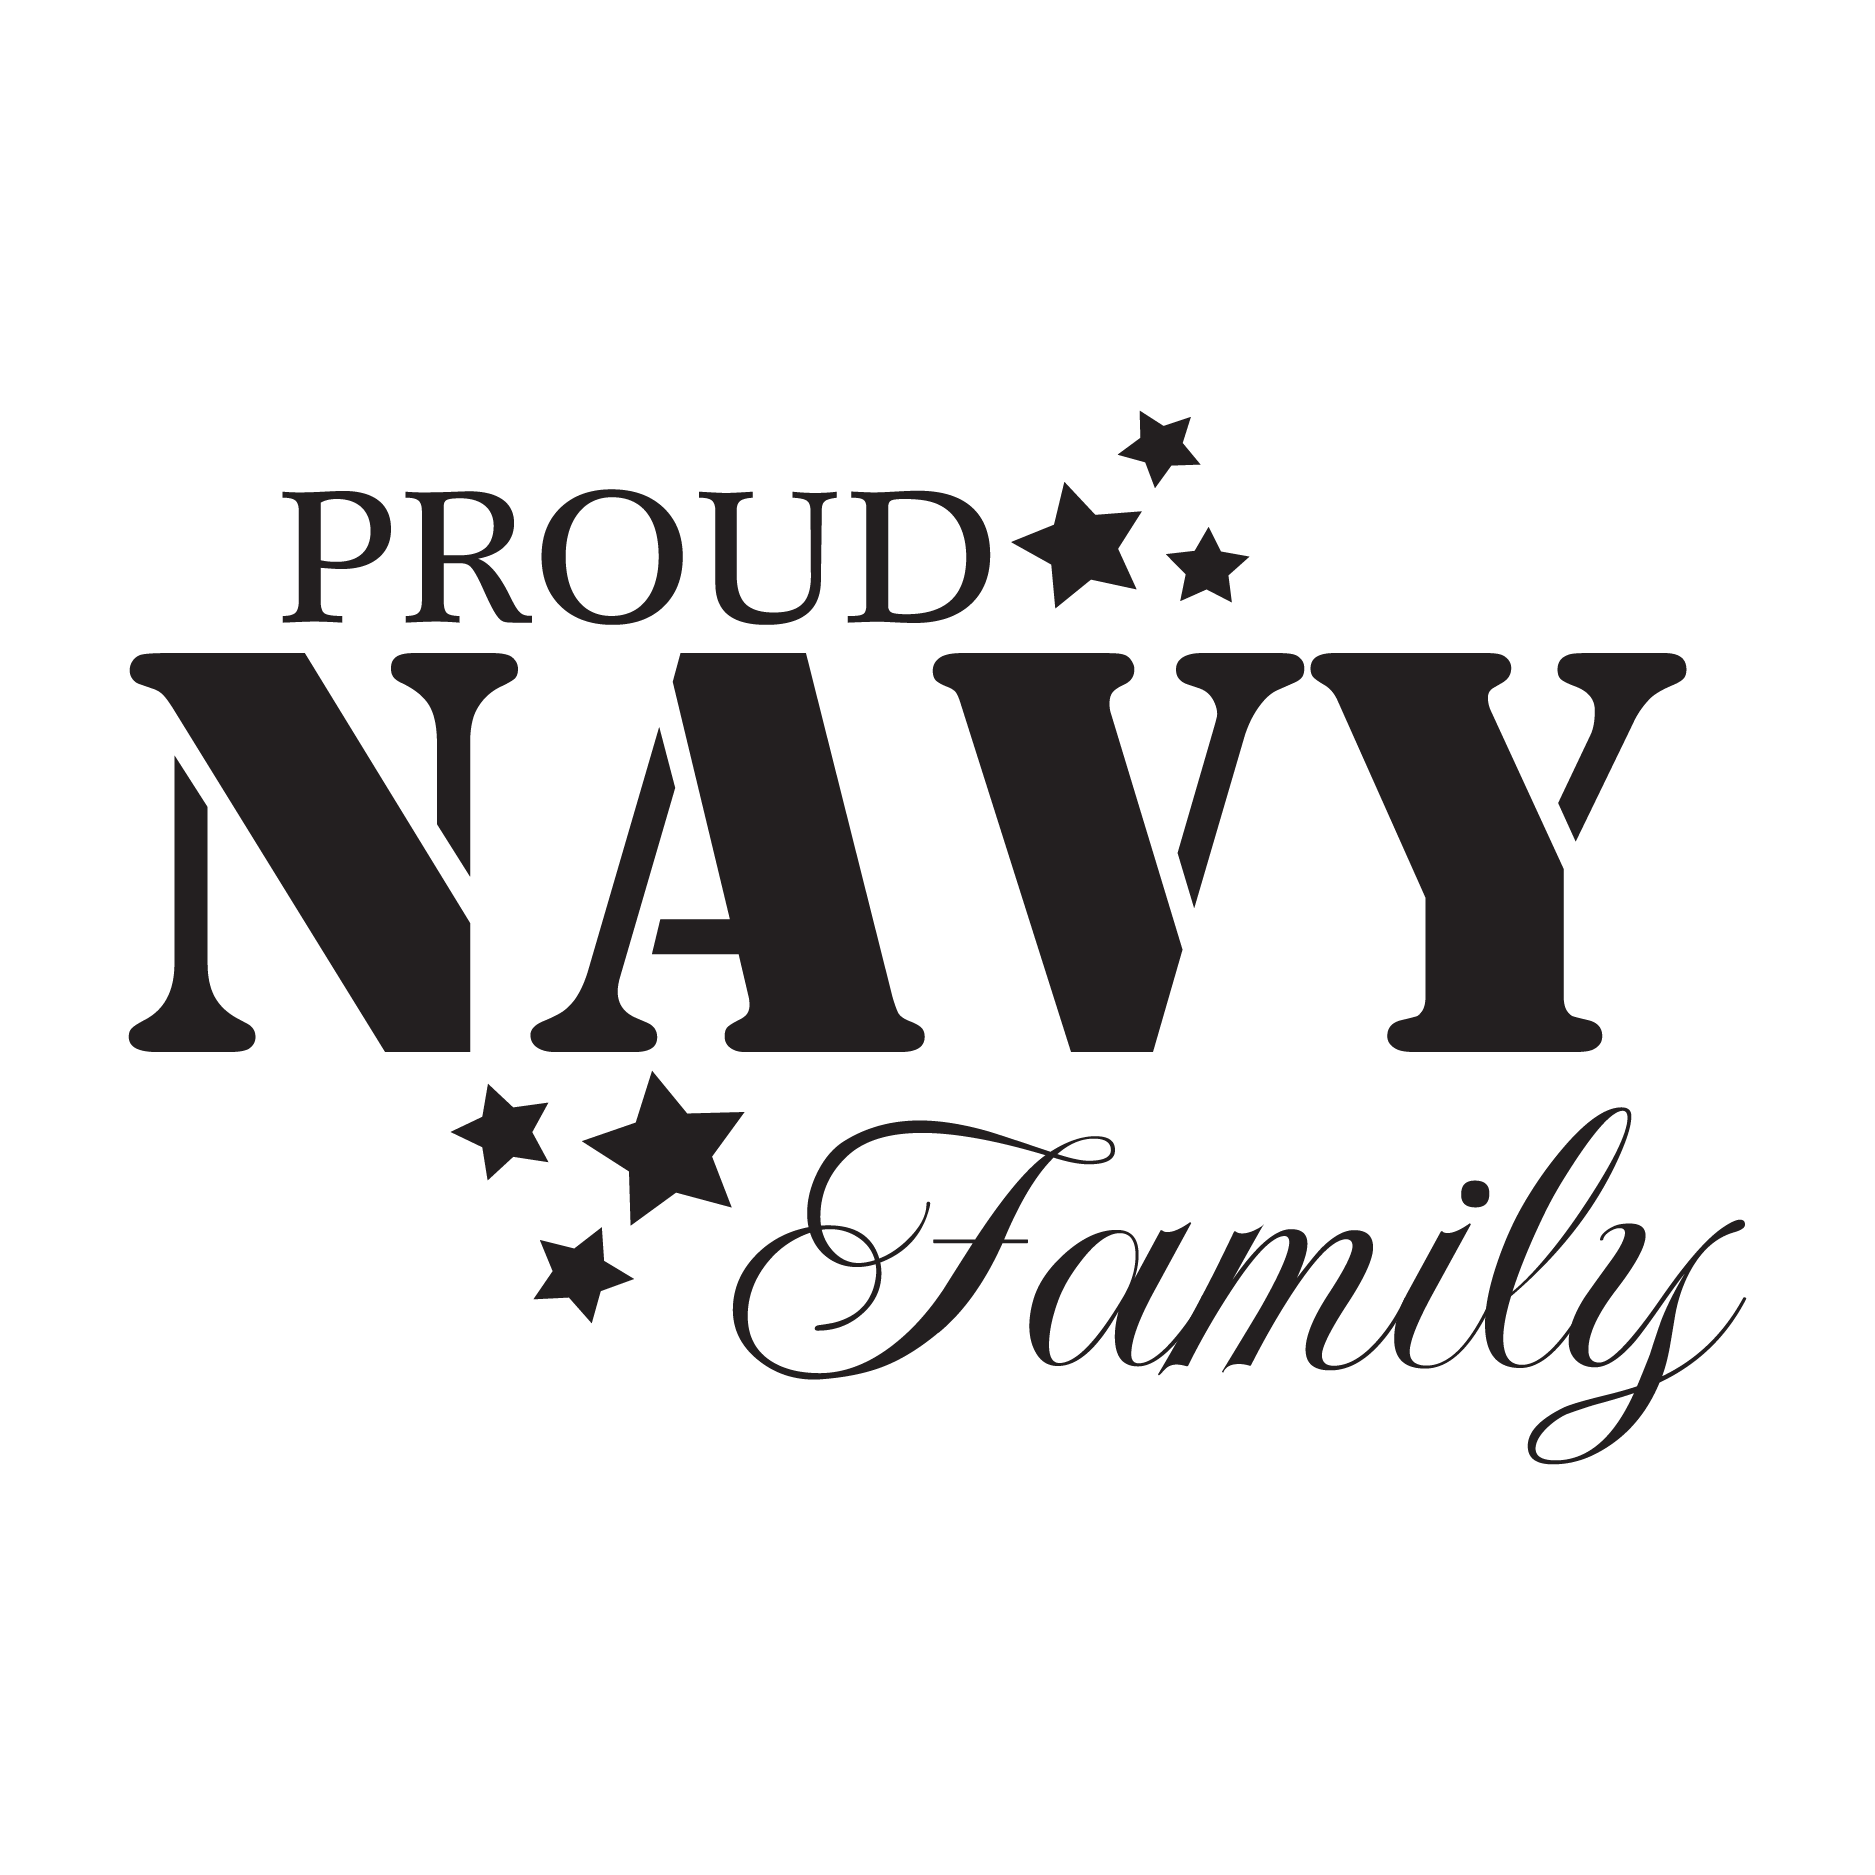 Download Proud Navy Family Wall Quotes™ Decal | WallQuotes.com